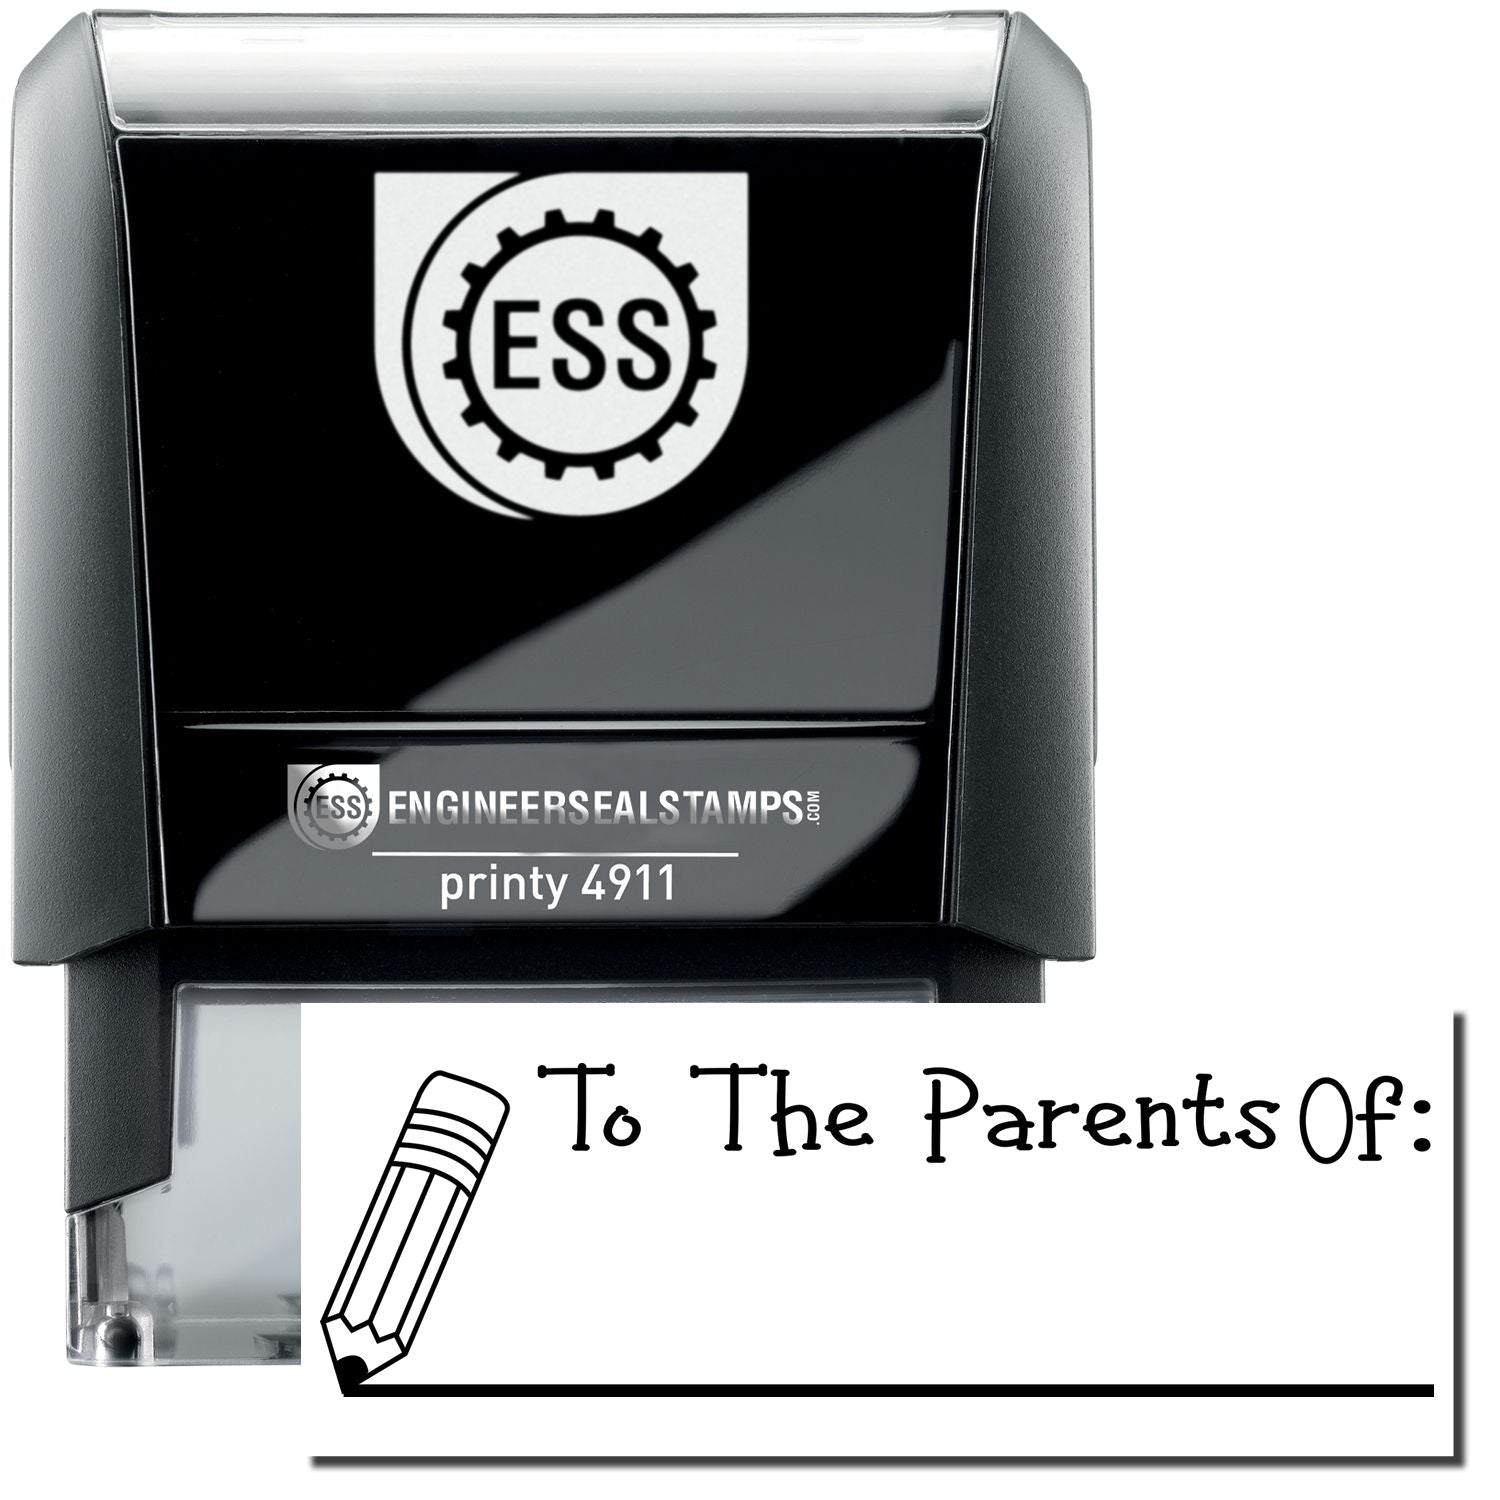 A self-inking stamp with a stamped image showing how the text "To The Parents Of:" with an image of a pencil next to the line is displayed after stamping.